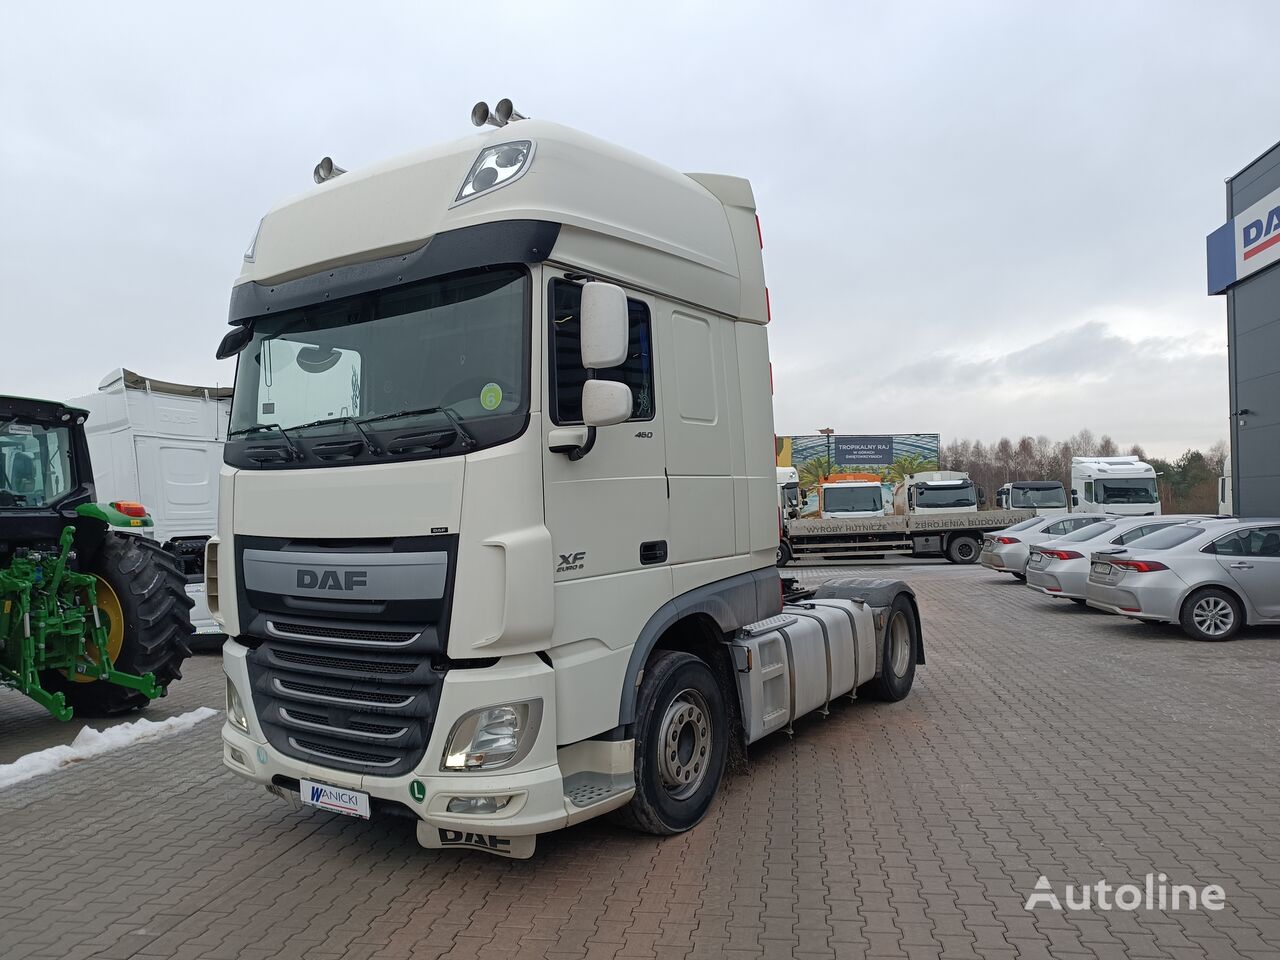 Daf Xf 460 Ft Standard Intarder Super Space Cab Automat Truck Tractor For Sale Poland 3245